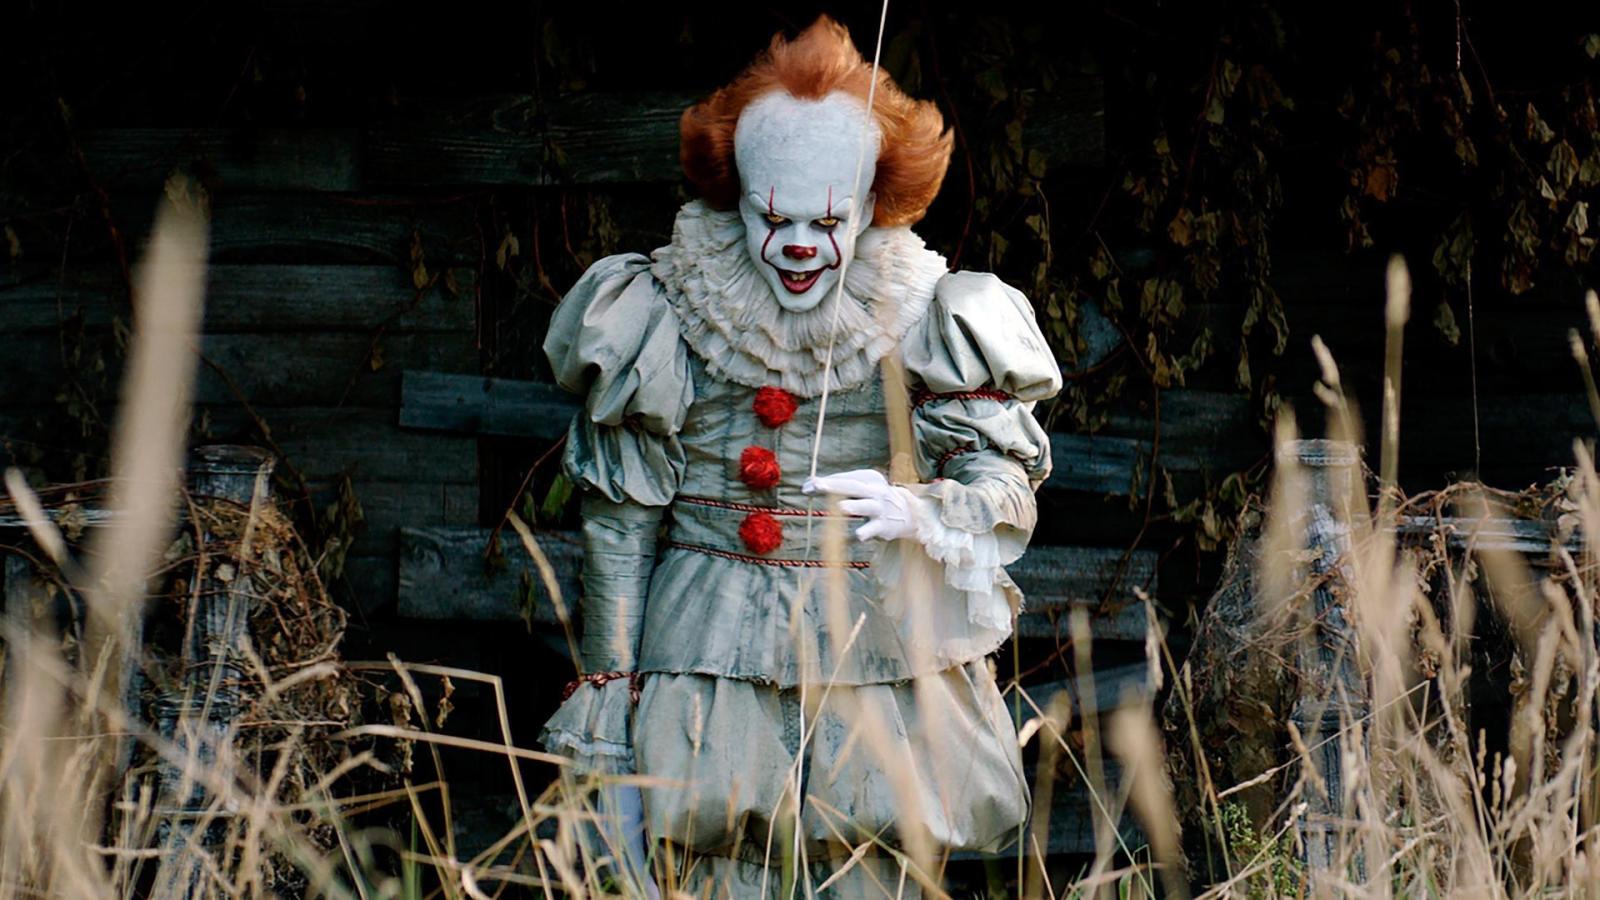 15 Best Movies With Jump Scares to Watch This Halloween - image 5